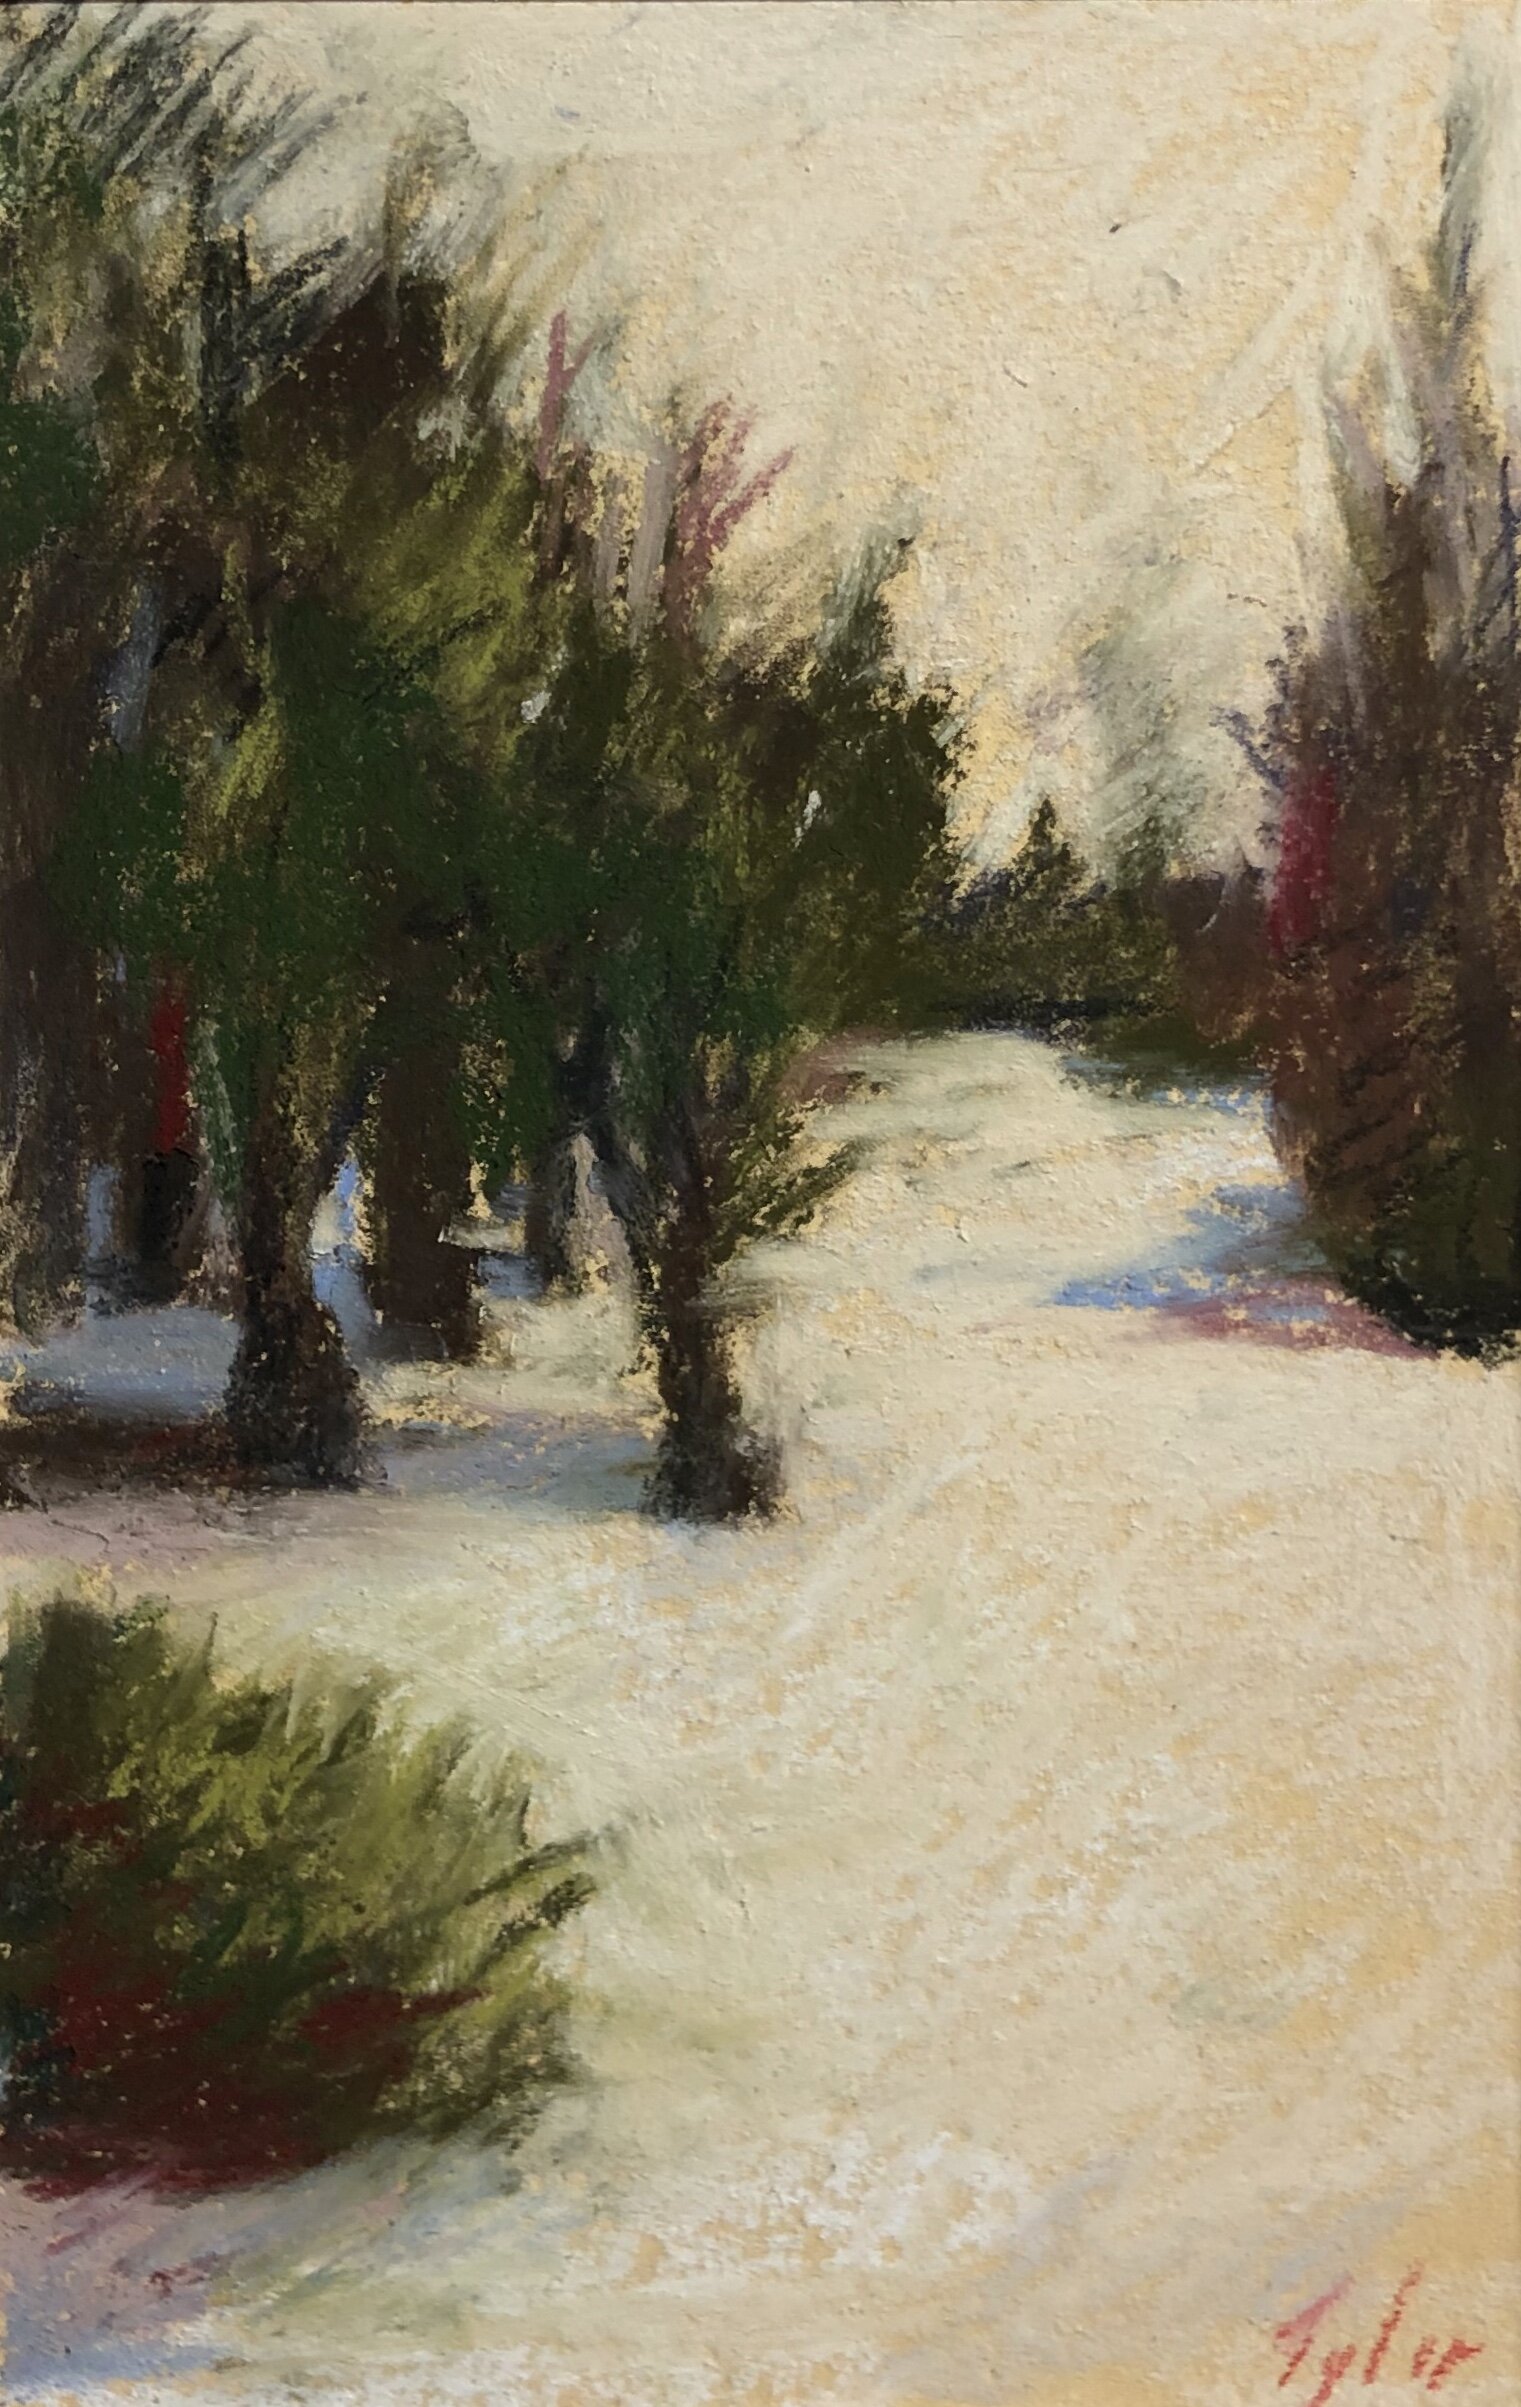  “Winter Warm”    pastel on sanded paper    4” x 6”    $150 